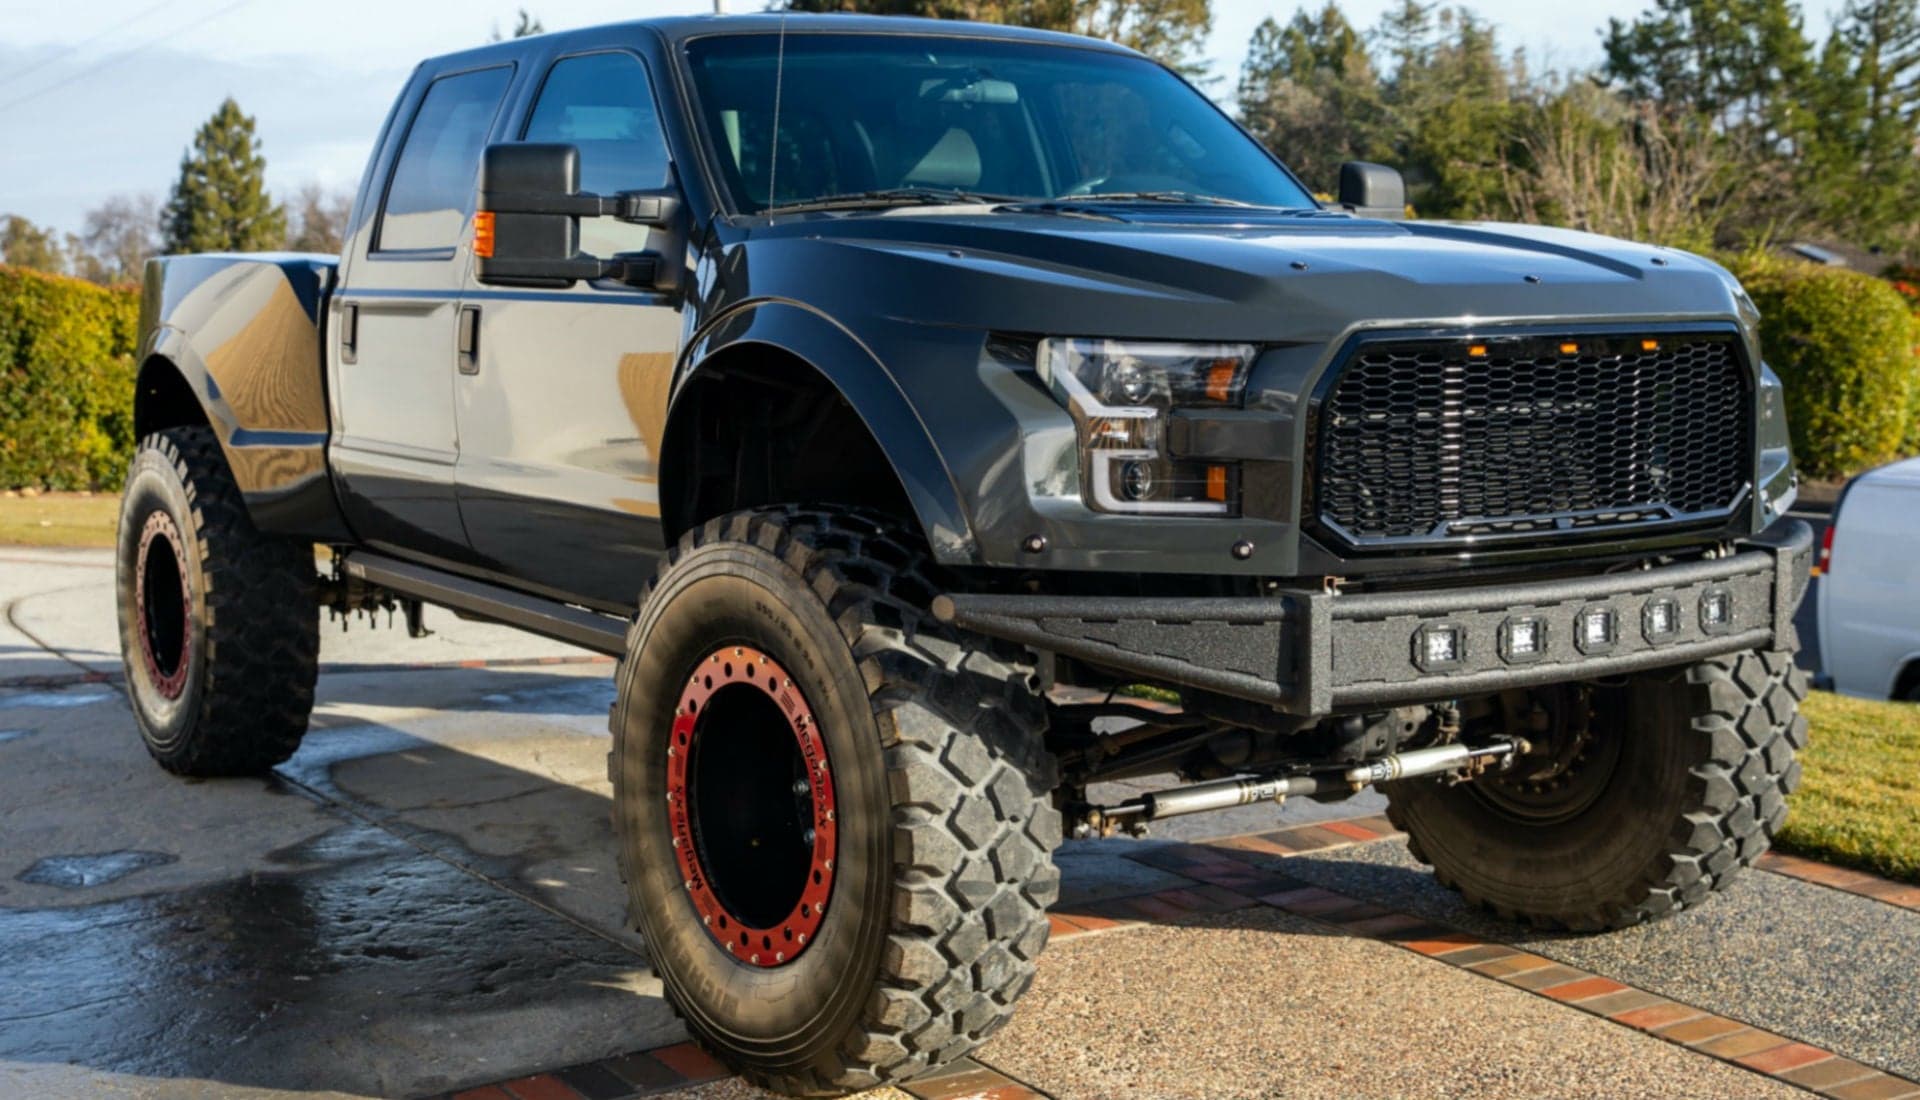 This Ford F-250 Super Duty 4×4 MegaRexx Makes a Raptor Look Like a Puny Focus